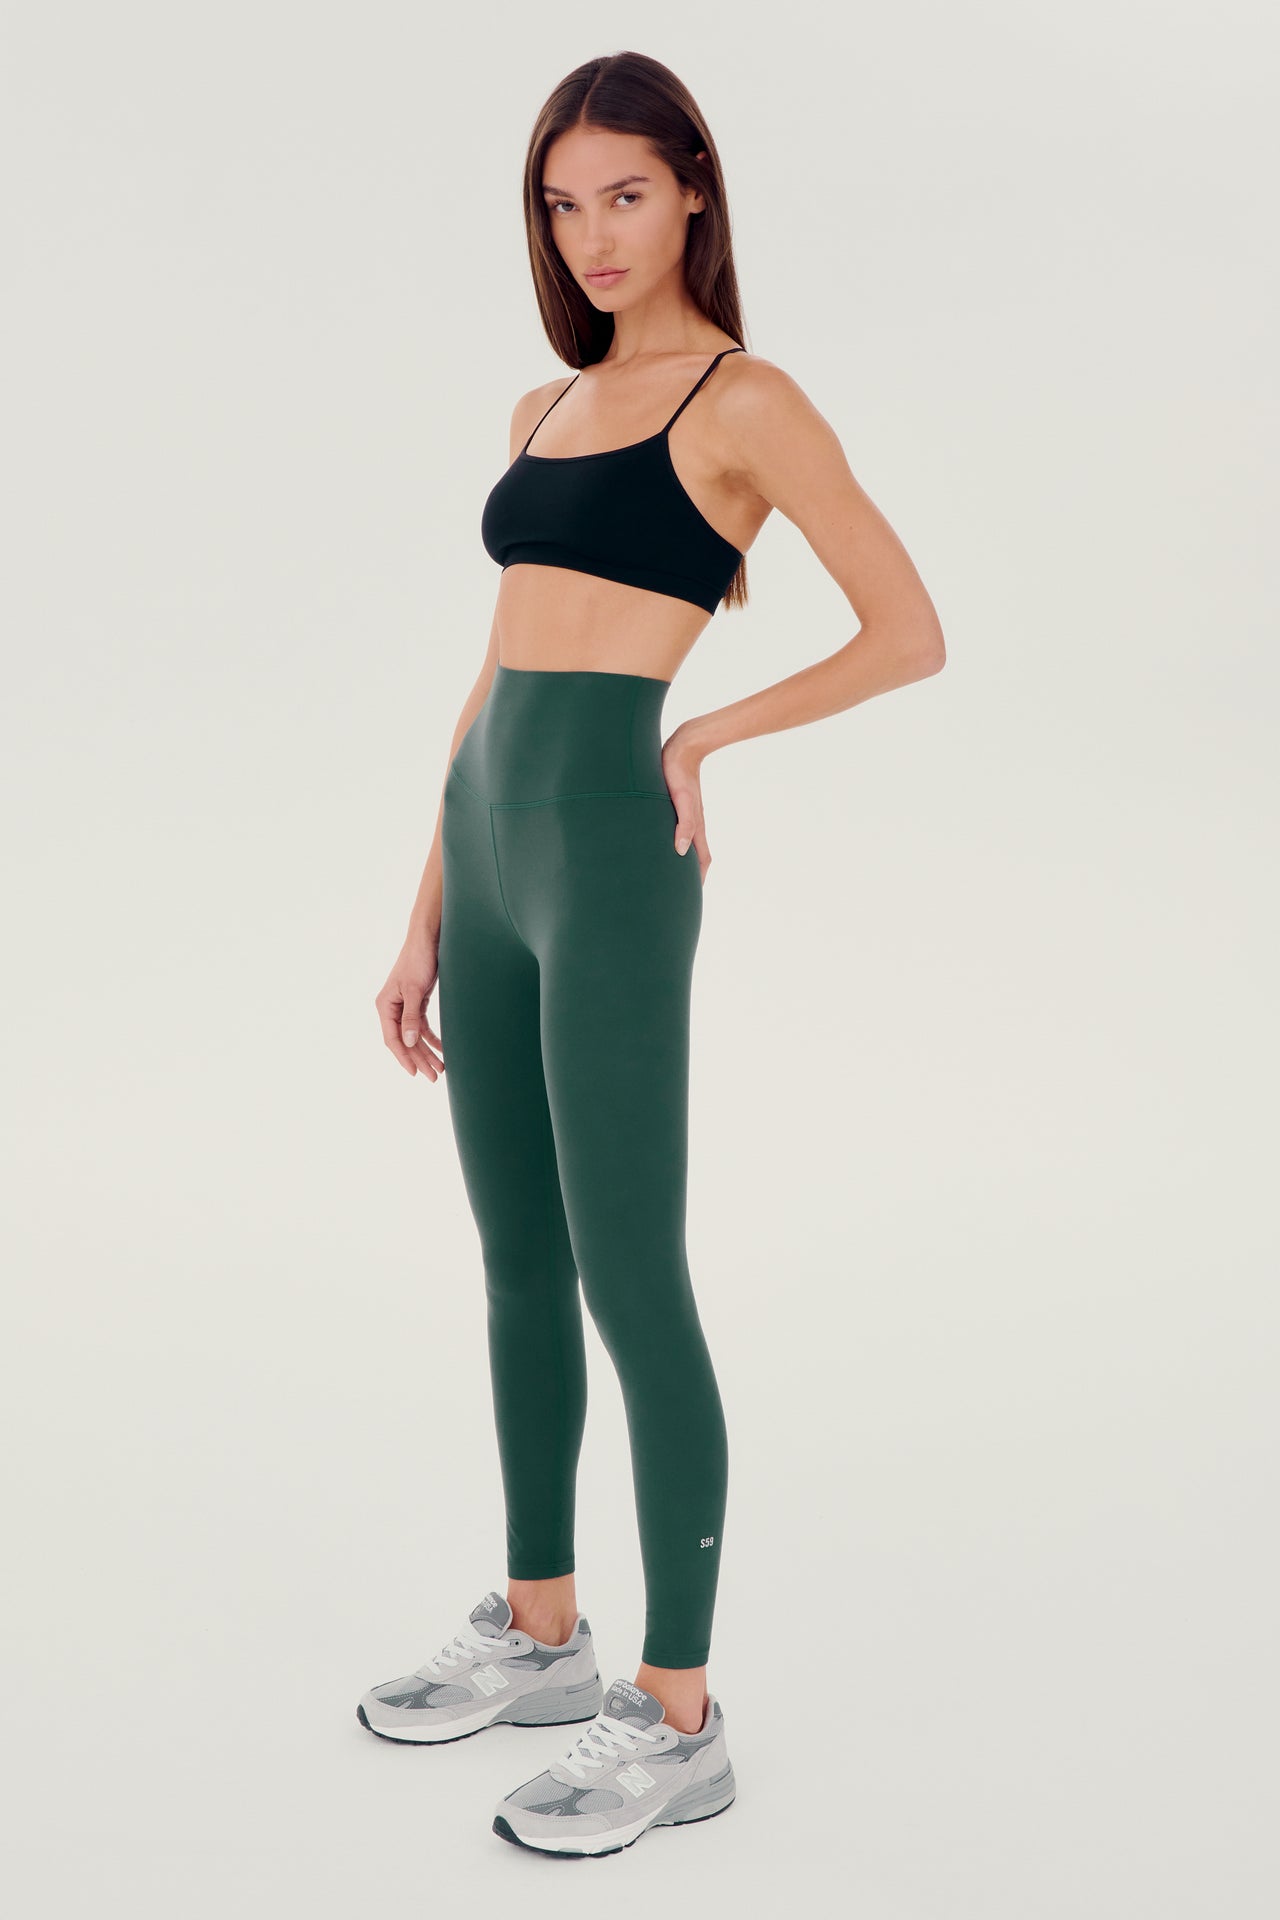 Full side view of girl wearing dark green leggings right above the ankle with black sports bra and grey shoes